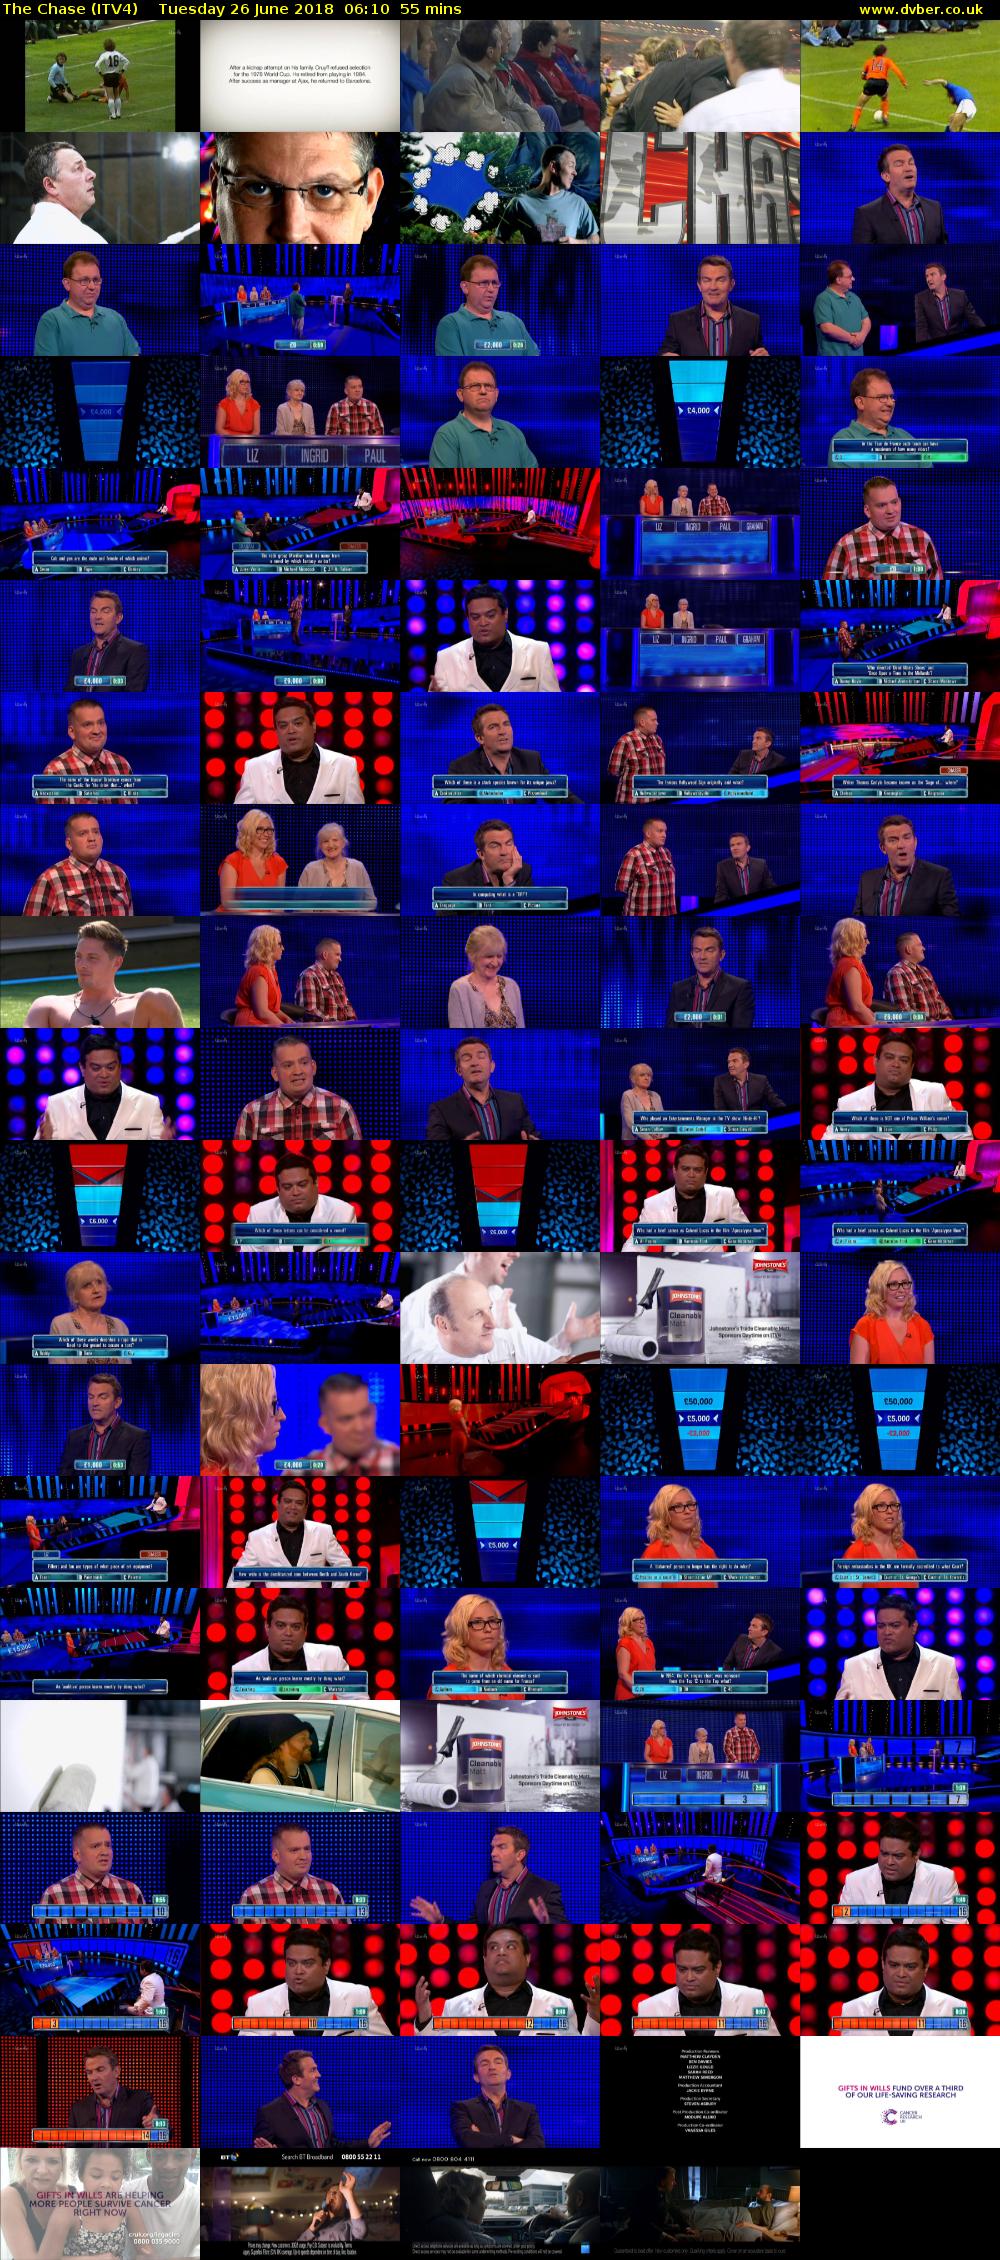 The Chase (ITV4) Tuesday 26 June 2018 06:10 - 07:05